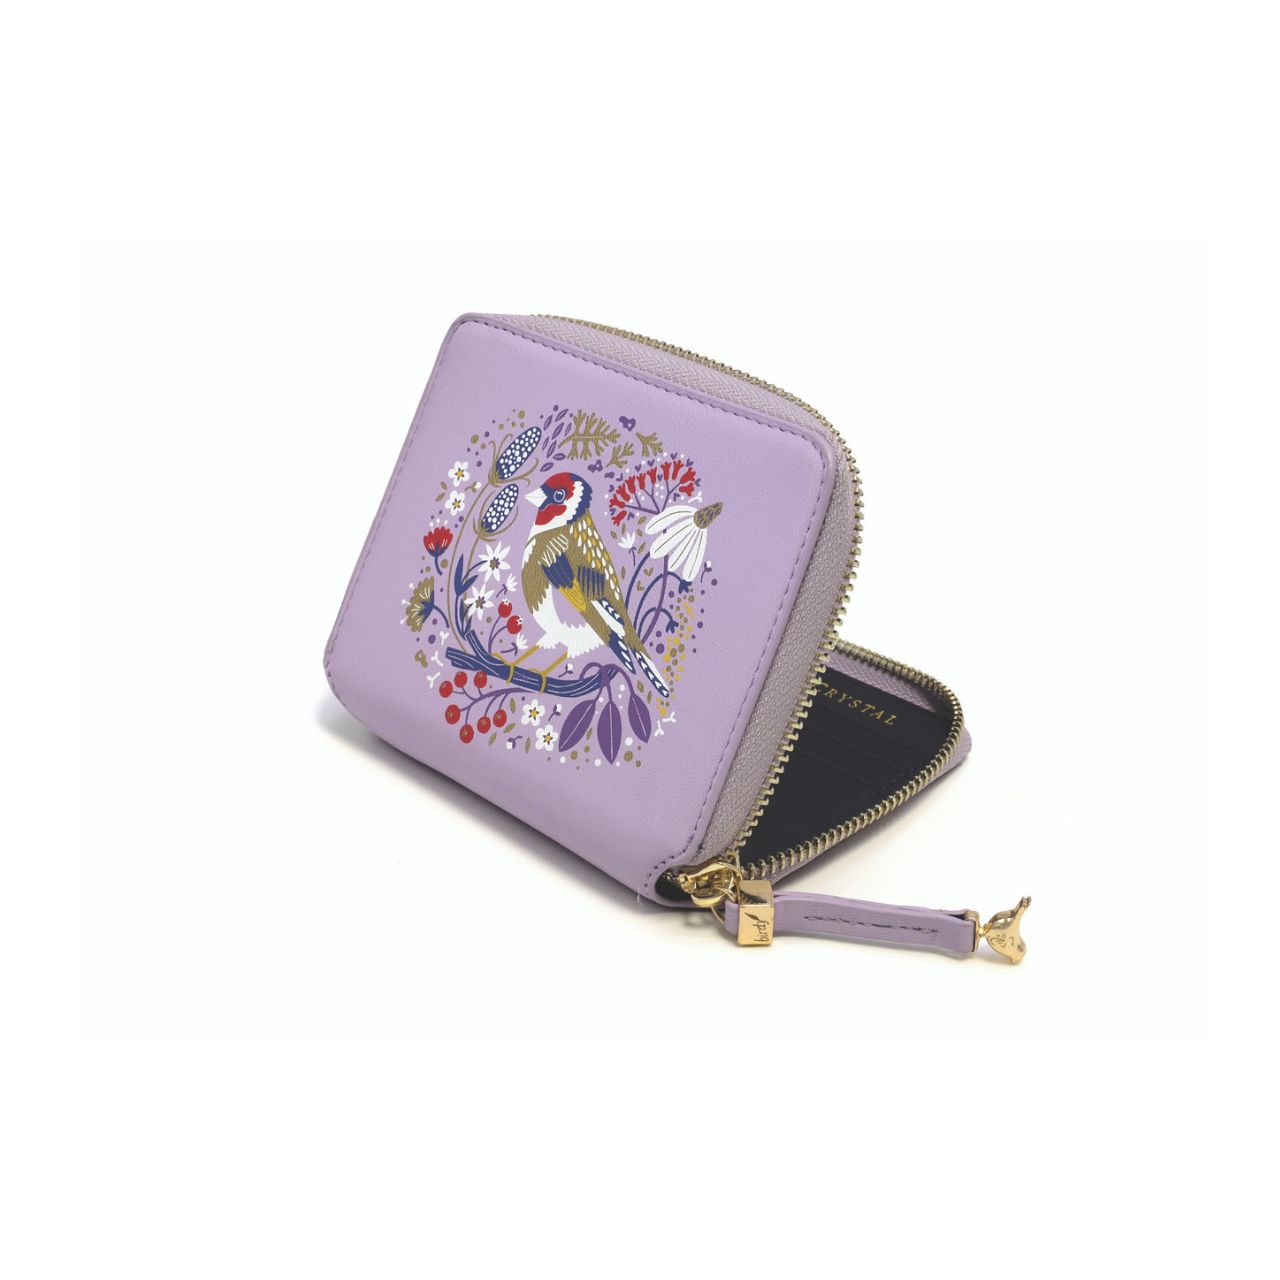 Tipperary Crystal Goldfinch Birdy Wallet  Our brightly coloured Birdy wallets are a perfectly compact ladies wallet. Designed to bring a splash of colour into your life! RFID blocking wallet, designed to block RFID readers from scanning your credit cards.